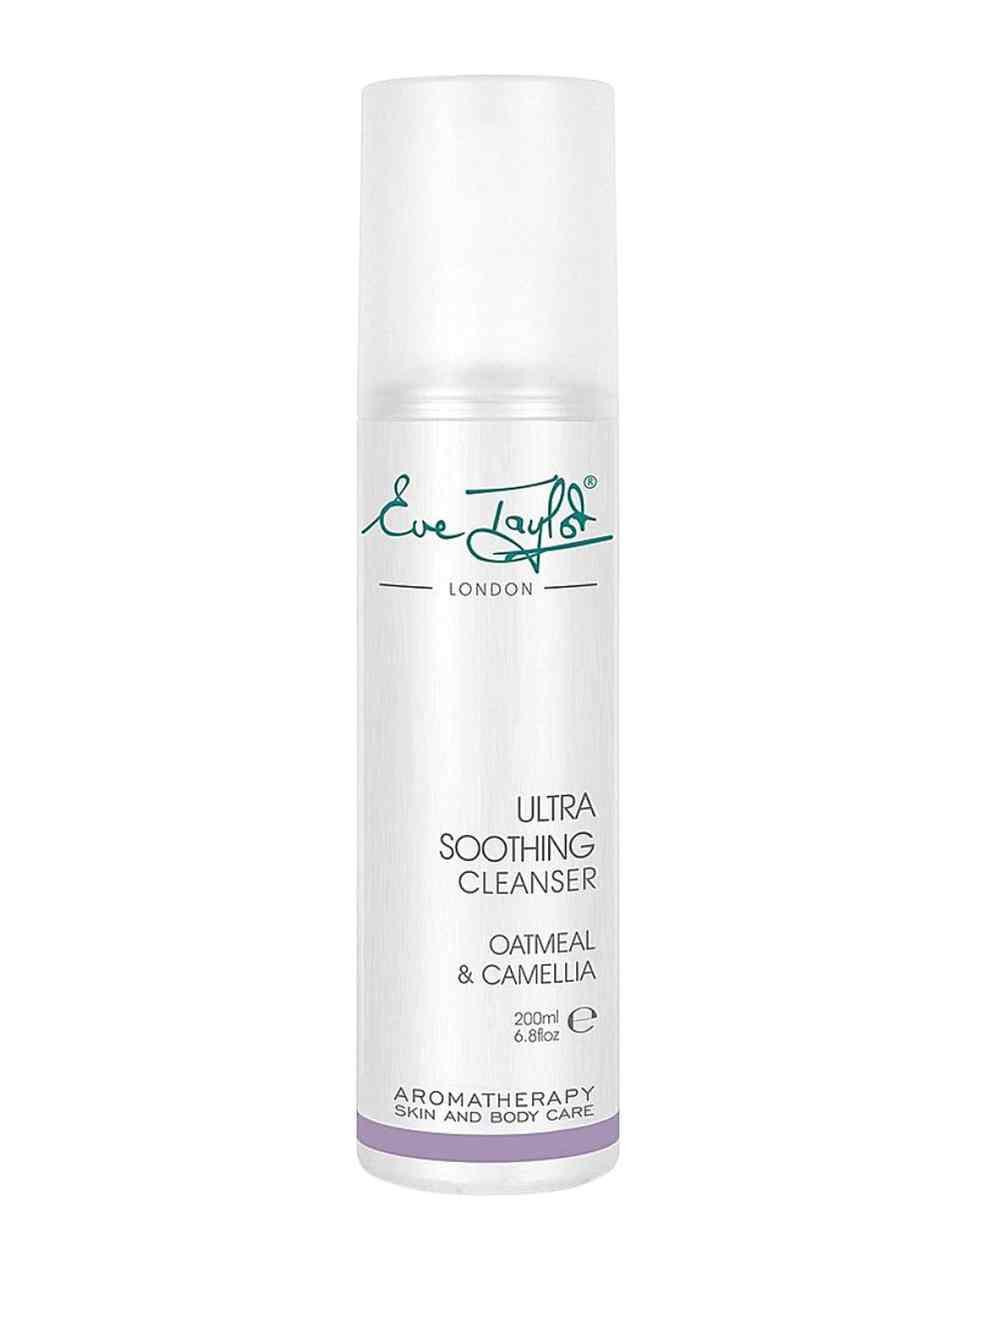 Eve Taylor London - Eve Taylor Ultra Soothing Cleanser